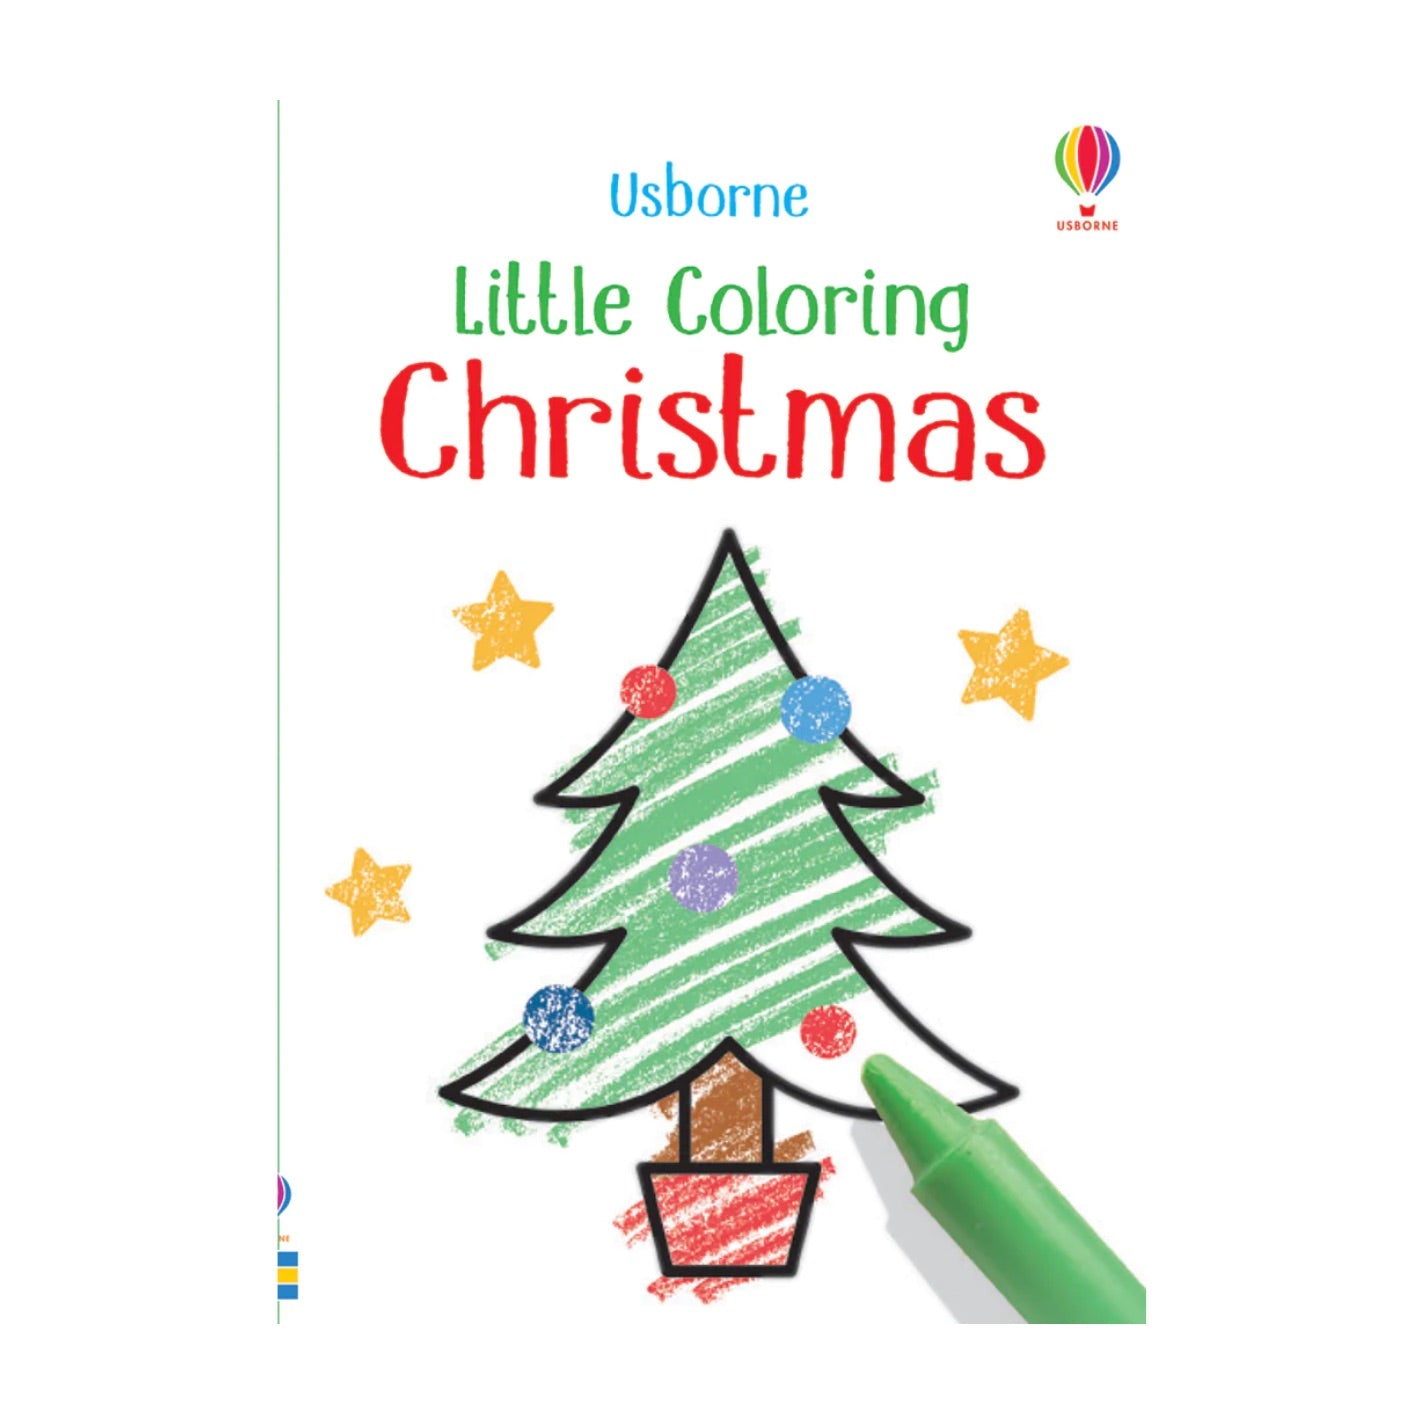 Little Coloring Christmas